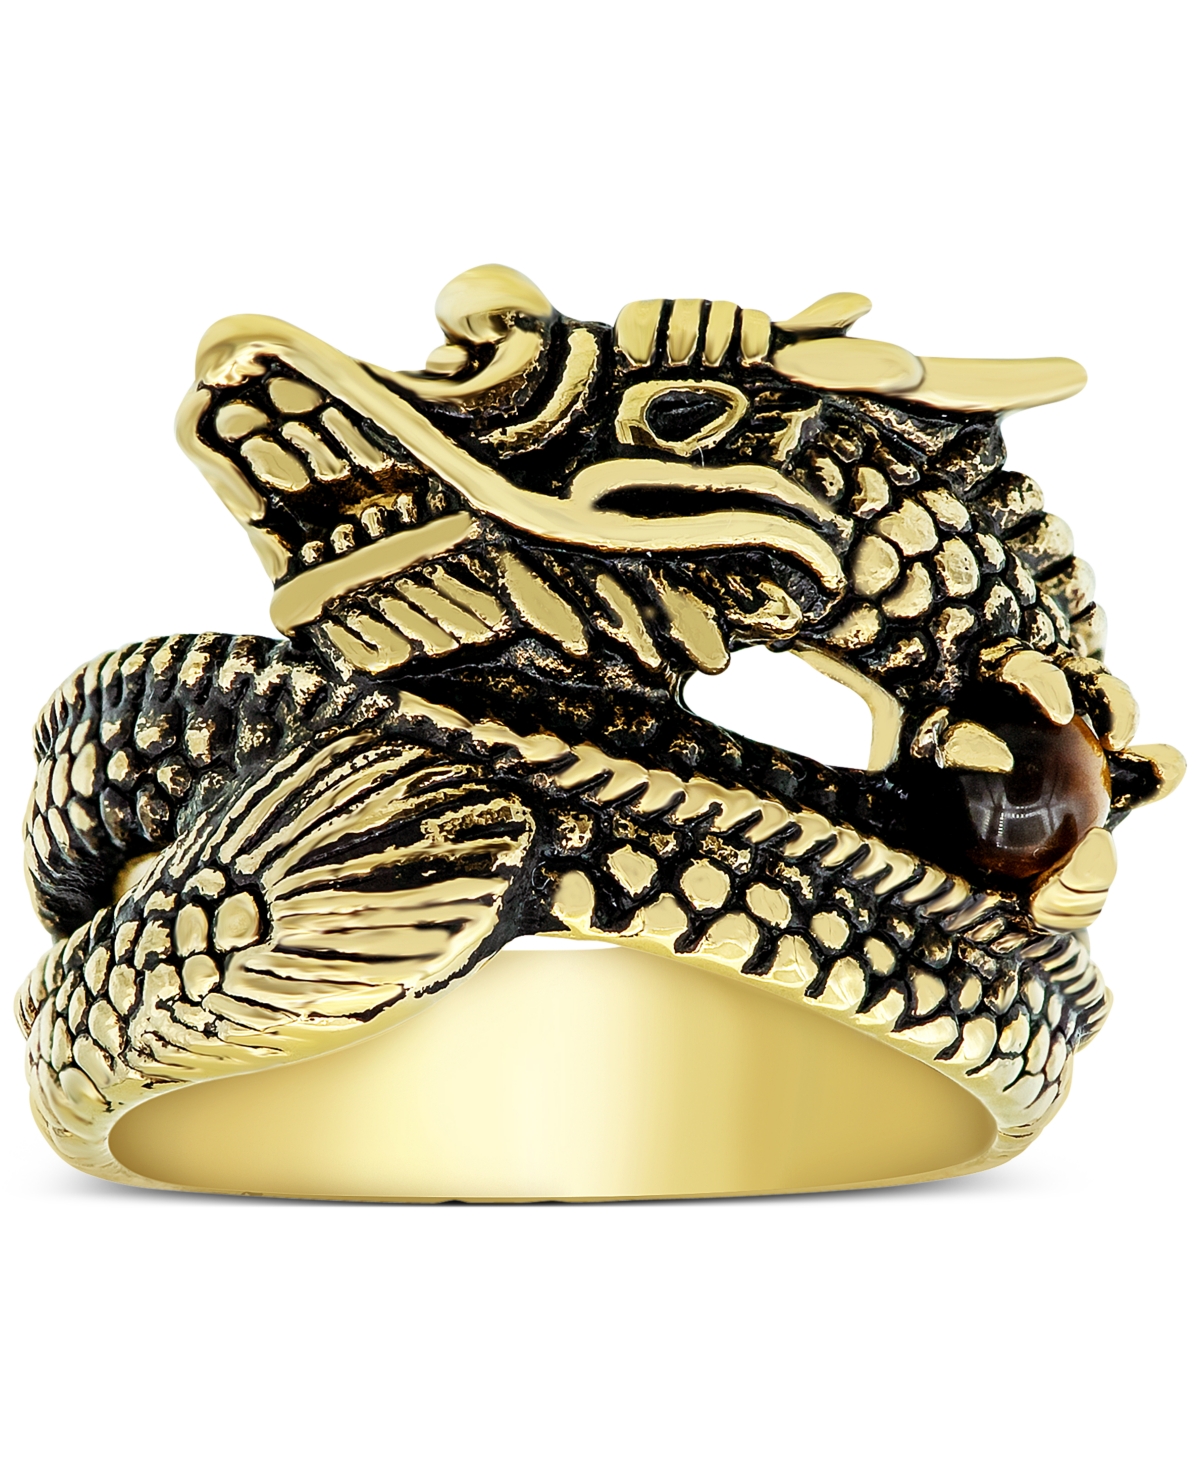 Men's Dragon Ring in Yellow & Black Ion-Plated Stainless Steel - Two-Tone